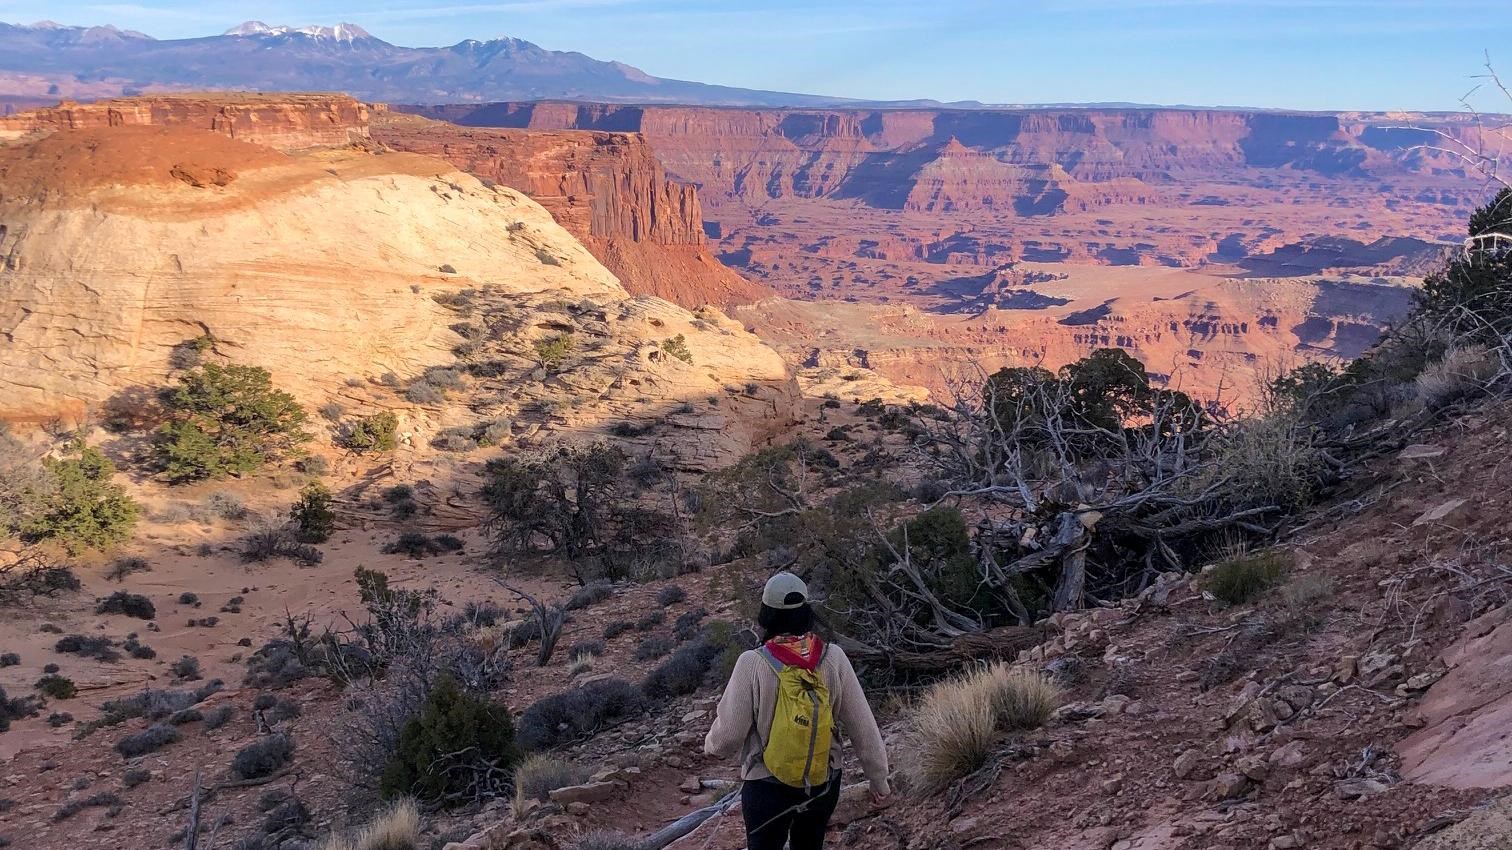 A hiker descends the trail into a canyon, sweeping views are visible in the distance. 